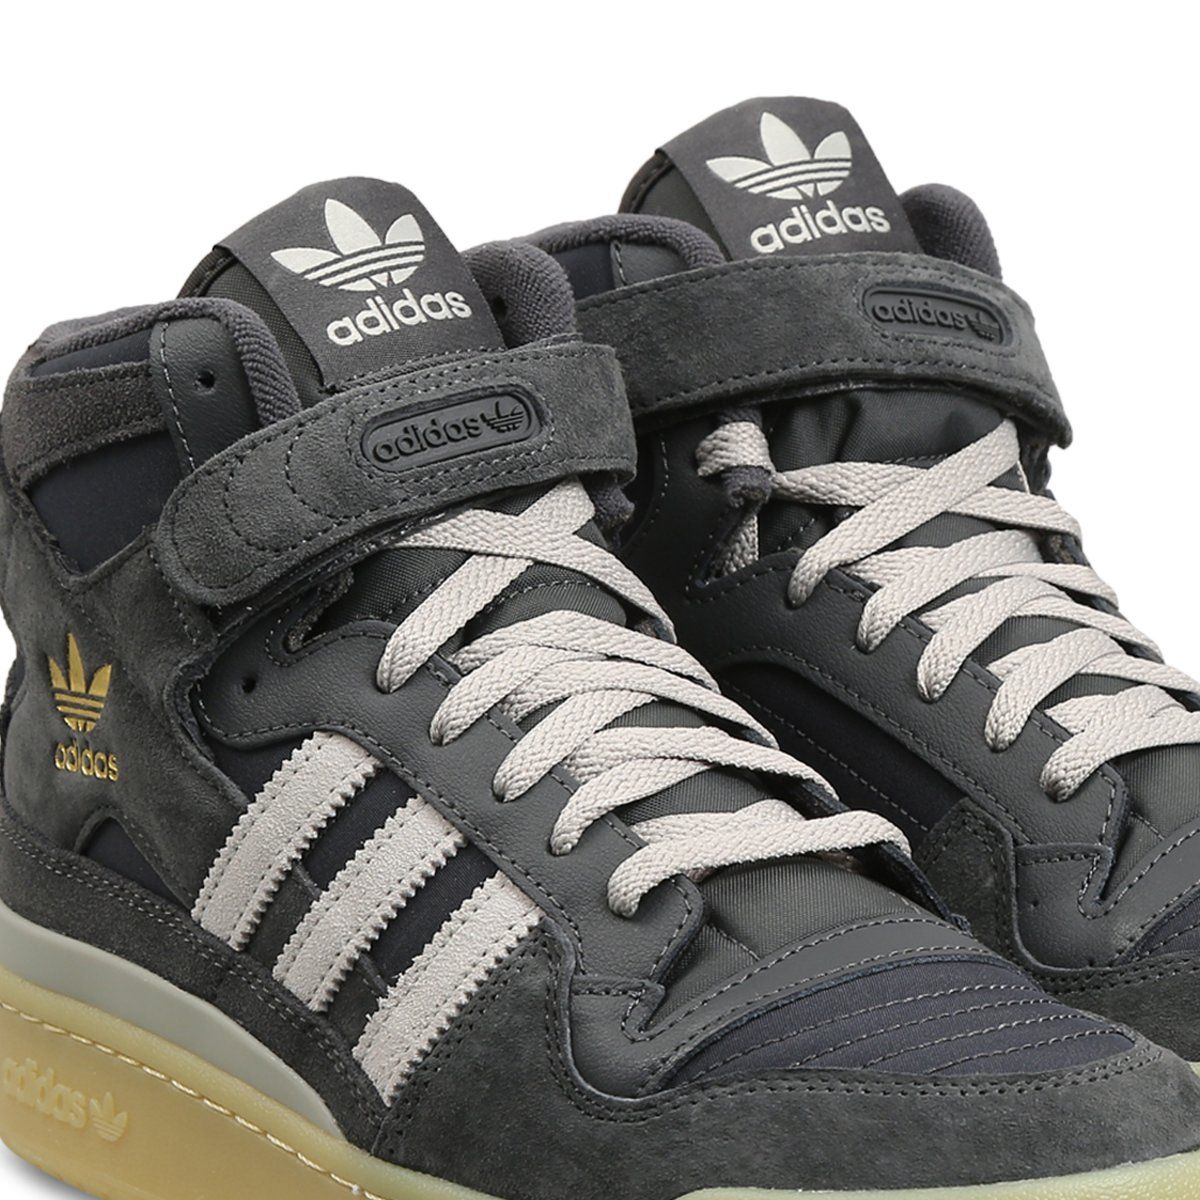 Adidas Campus 00s Grey Six Core Black - Sneakers HQ8709